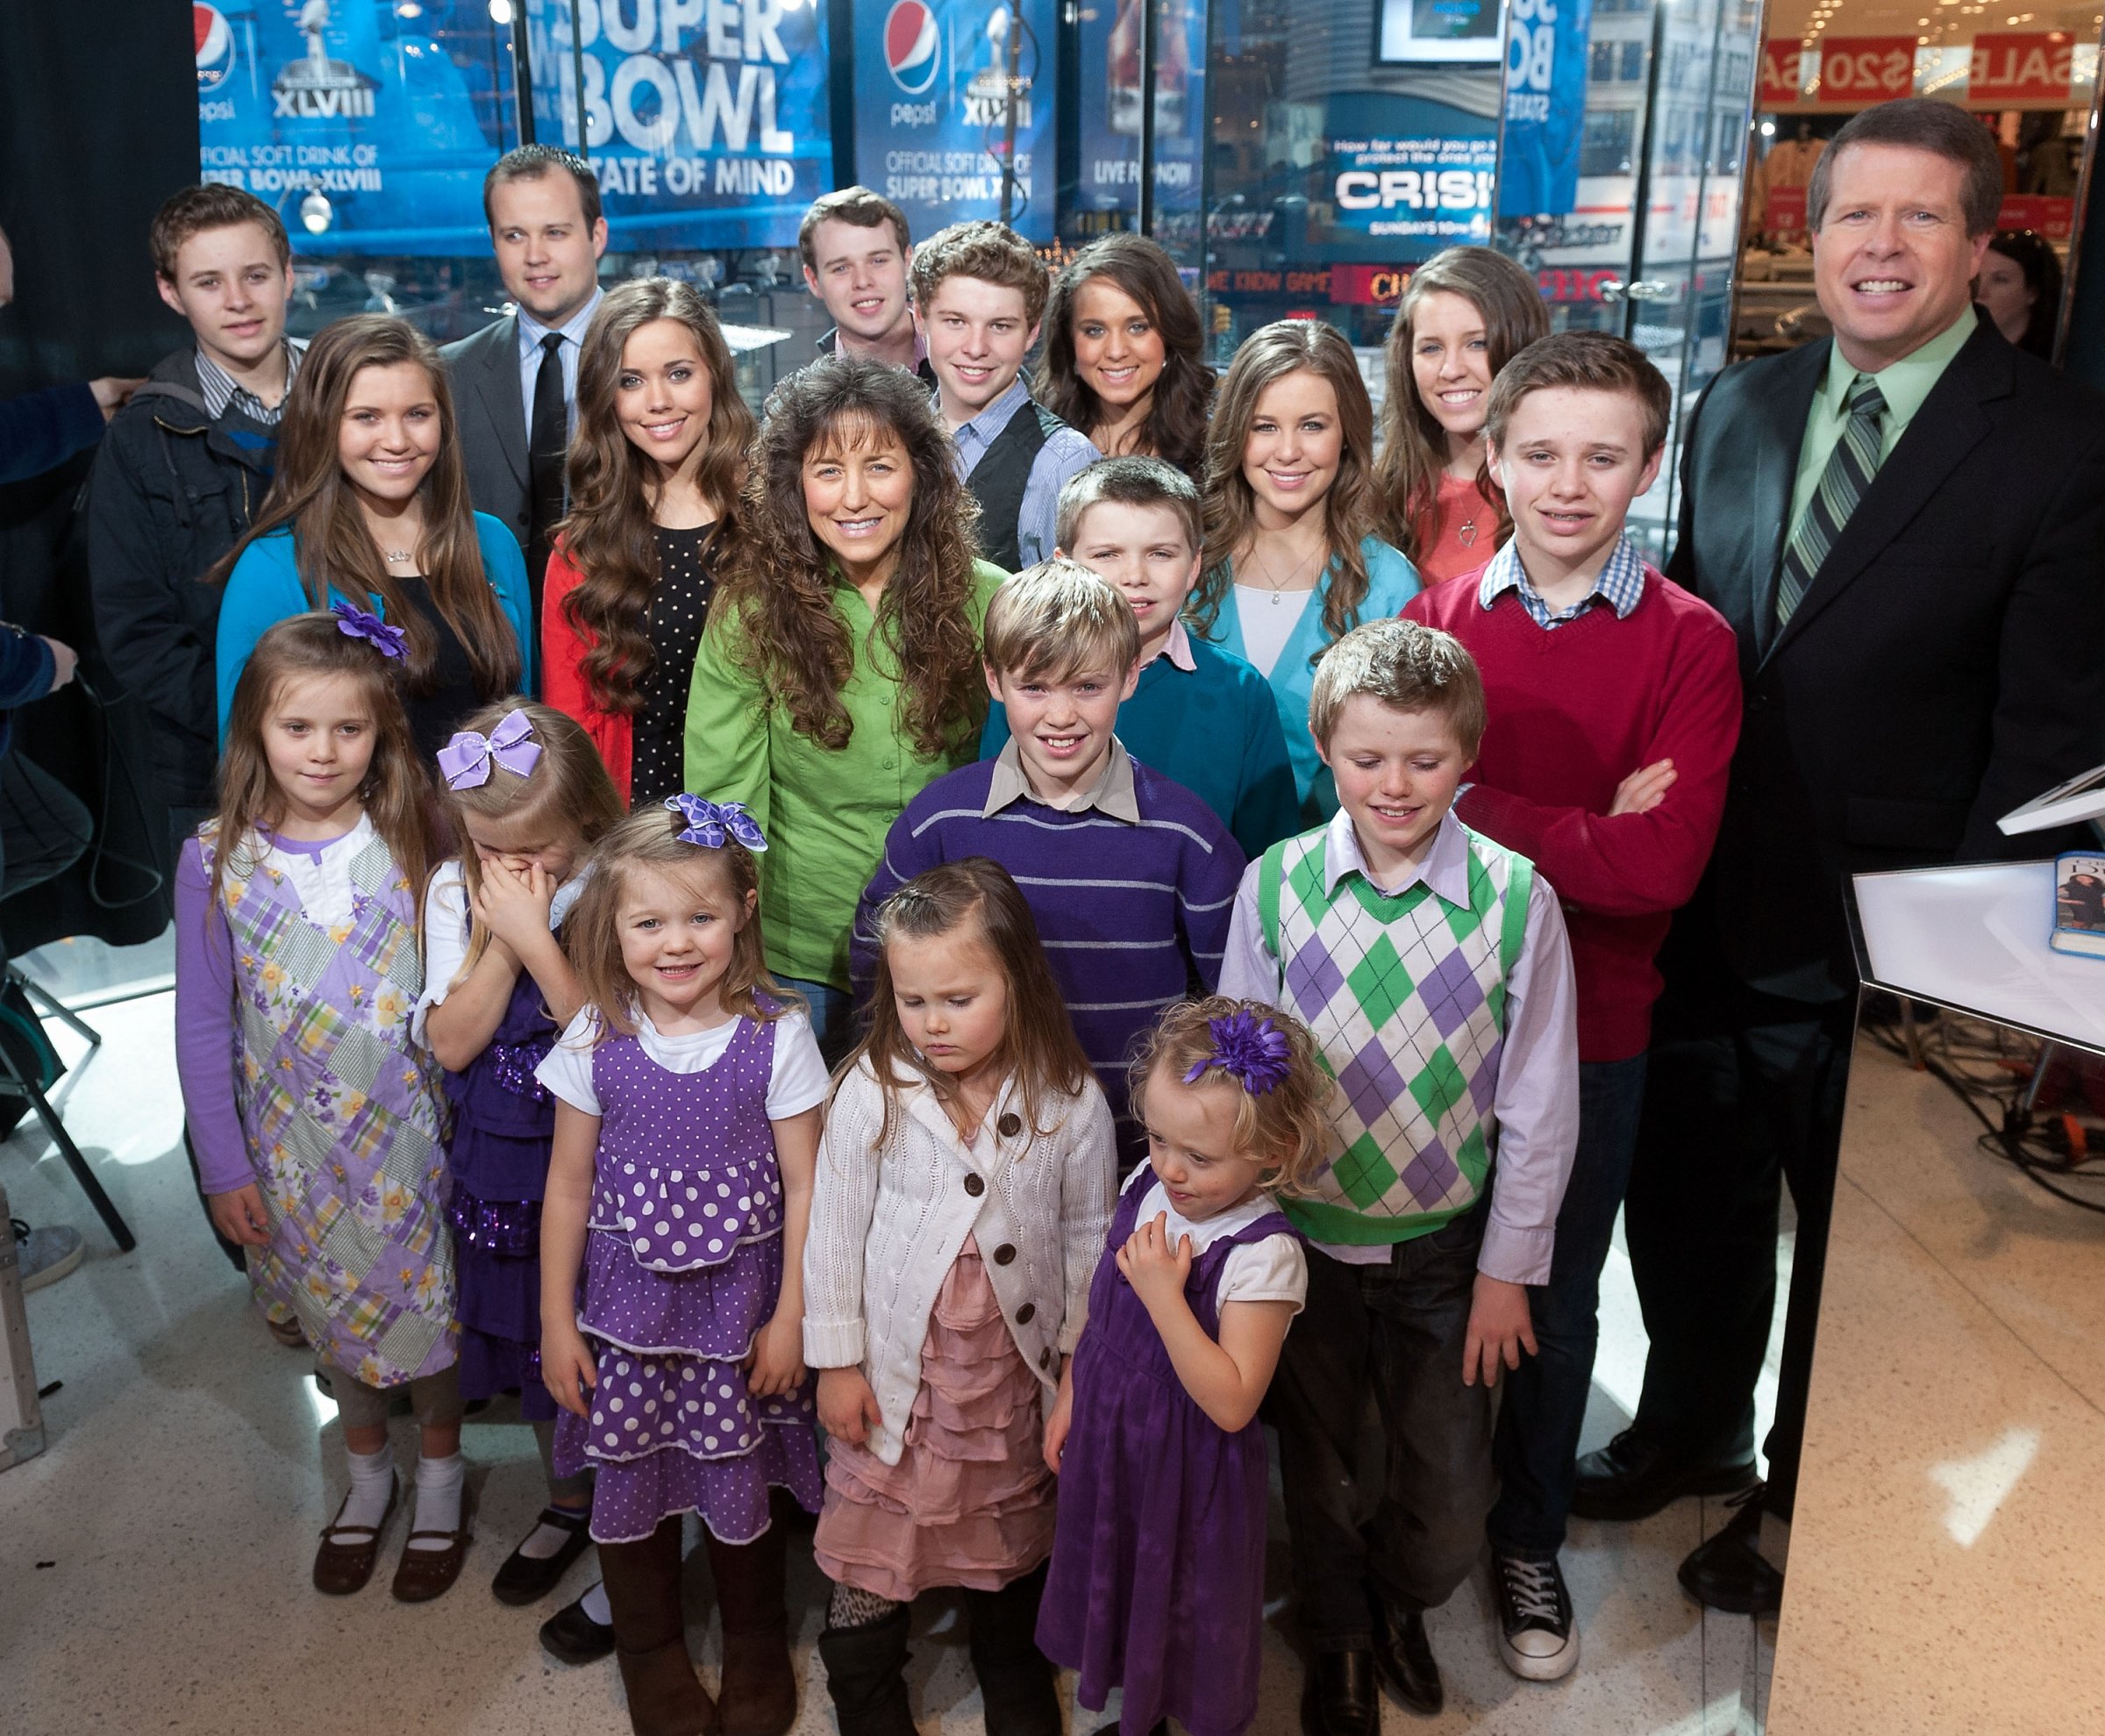 The Duggar family visits 'Extra' at their New York studios on March 11, 2014.